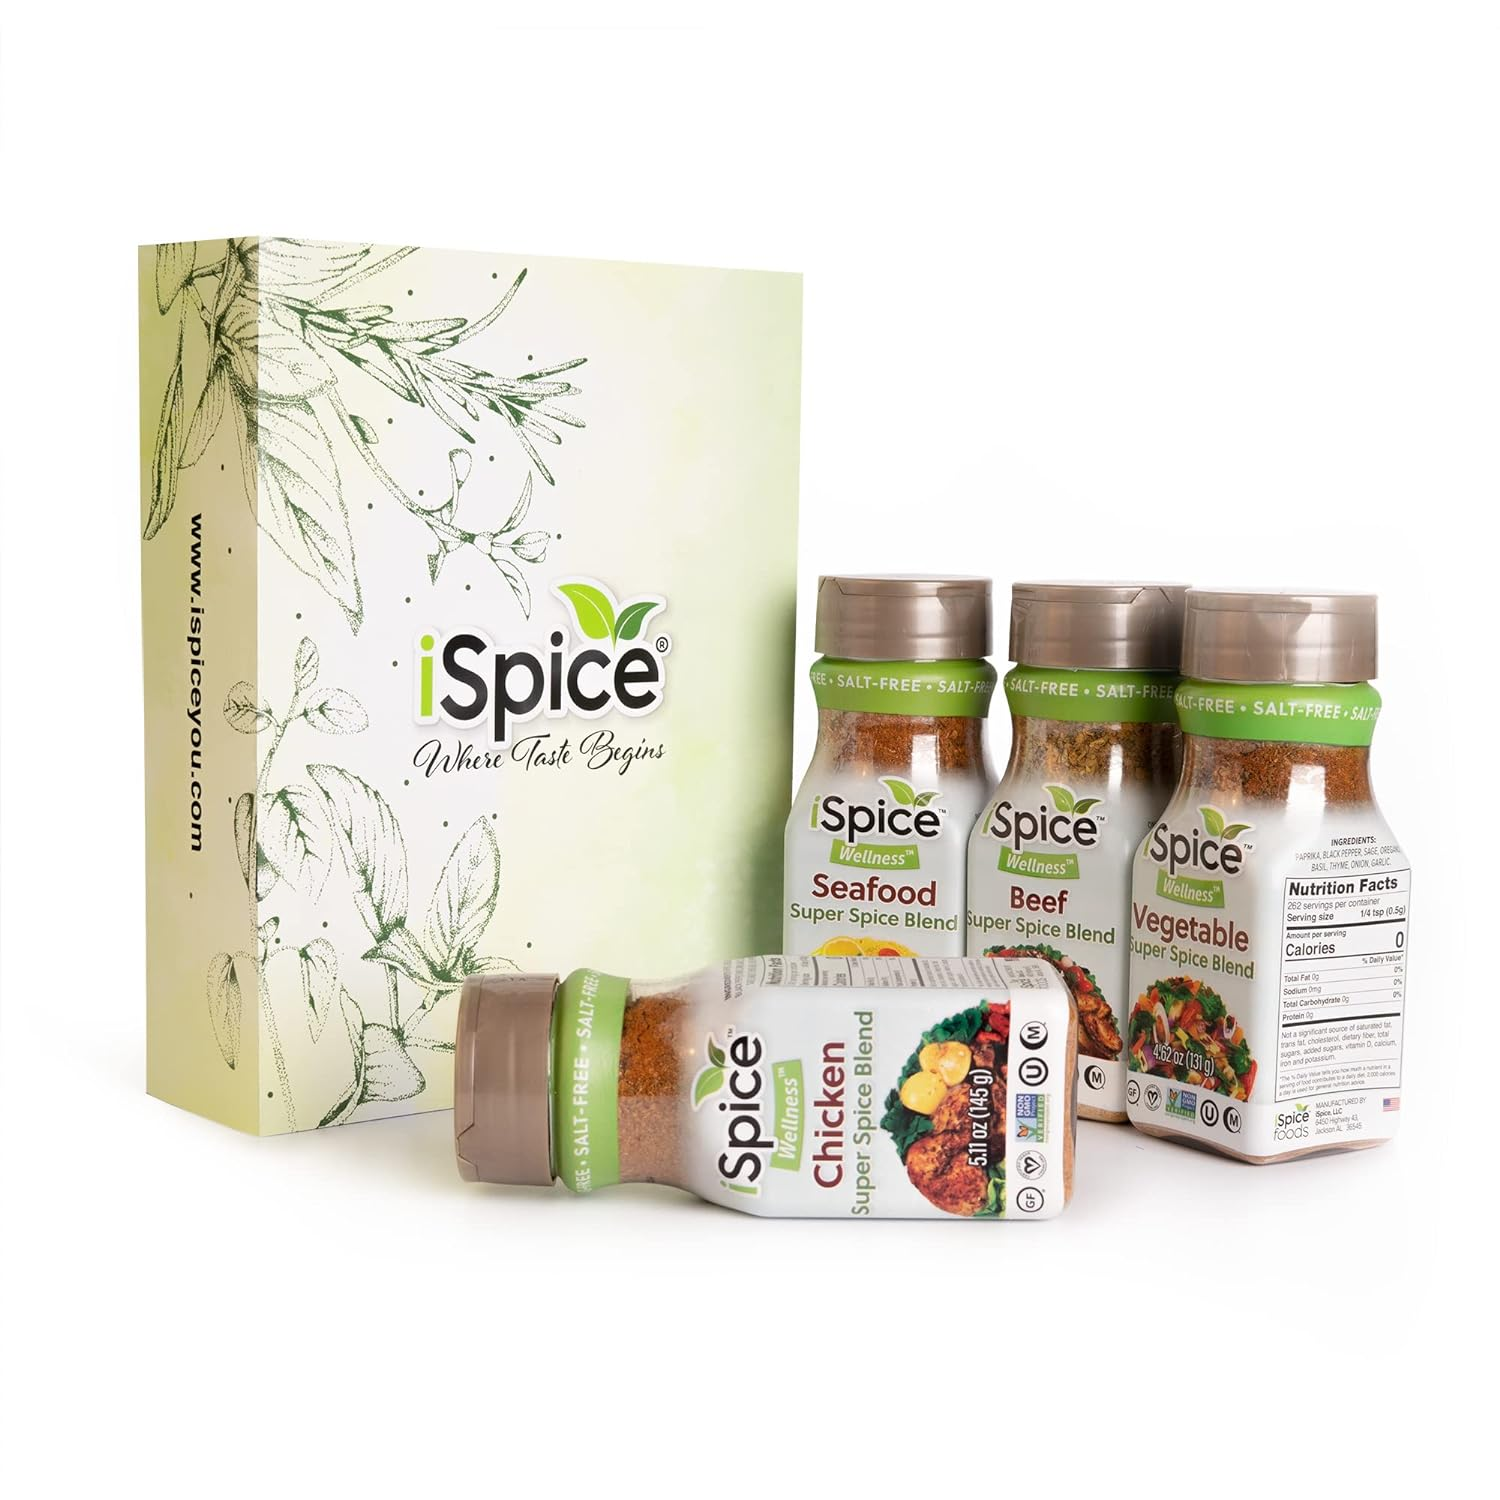 ispice spice blend